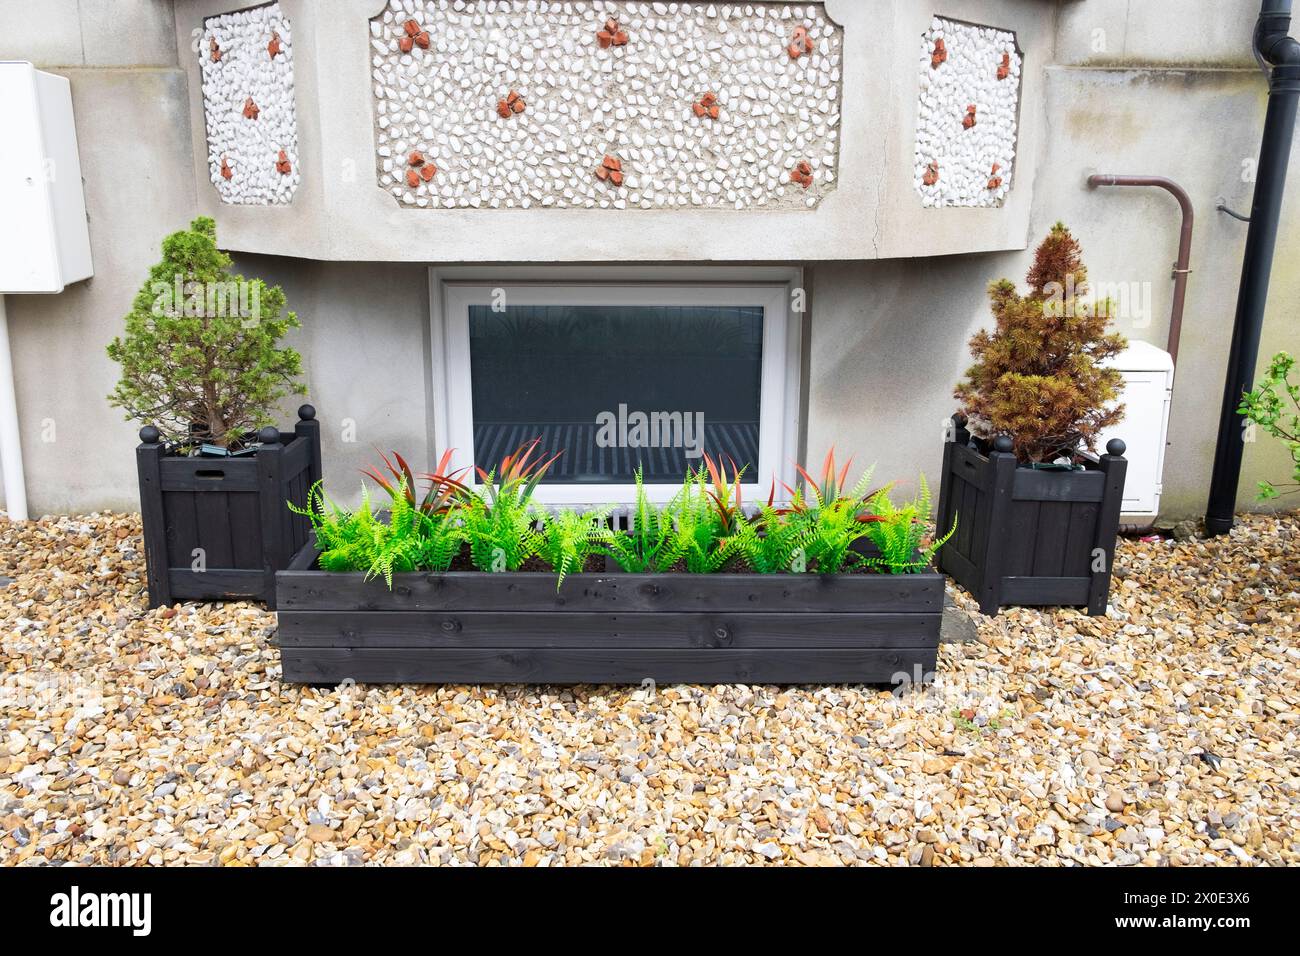 Kitsch plastic fake artificial foliage plants ferns in fake wooden container outside in front garden of home house pebbles not lawn UK  KATHY DEWITT Stock Photo